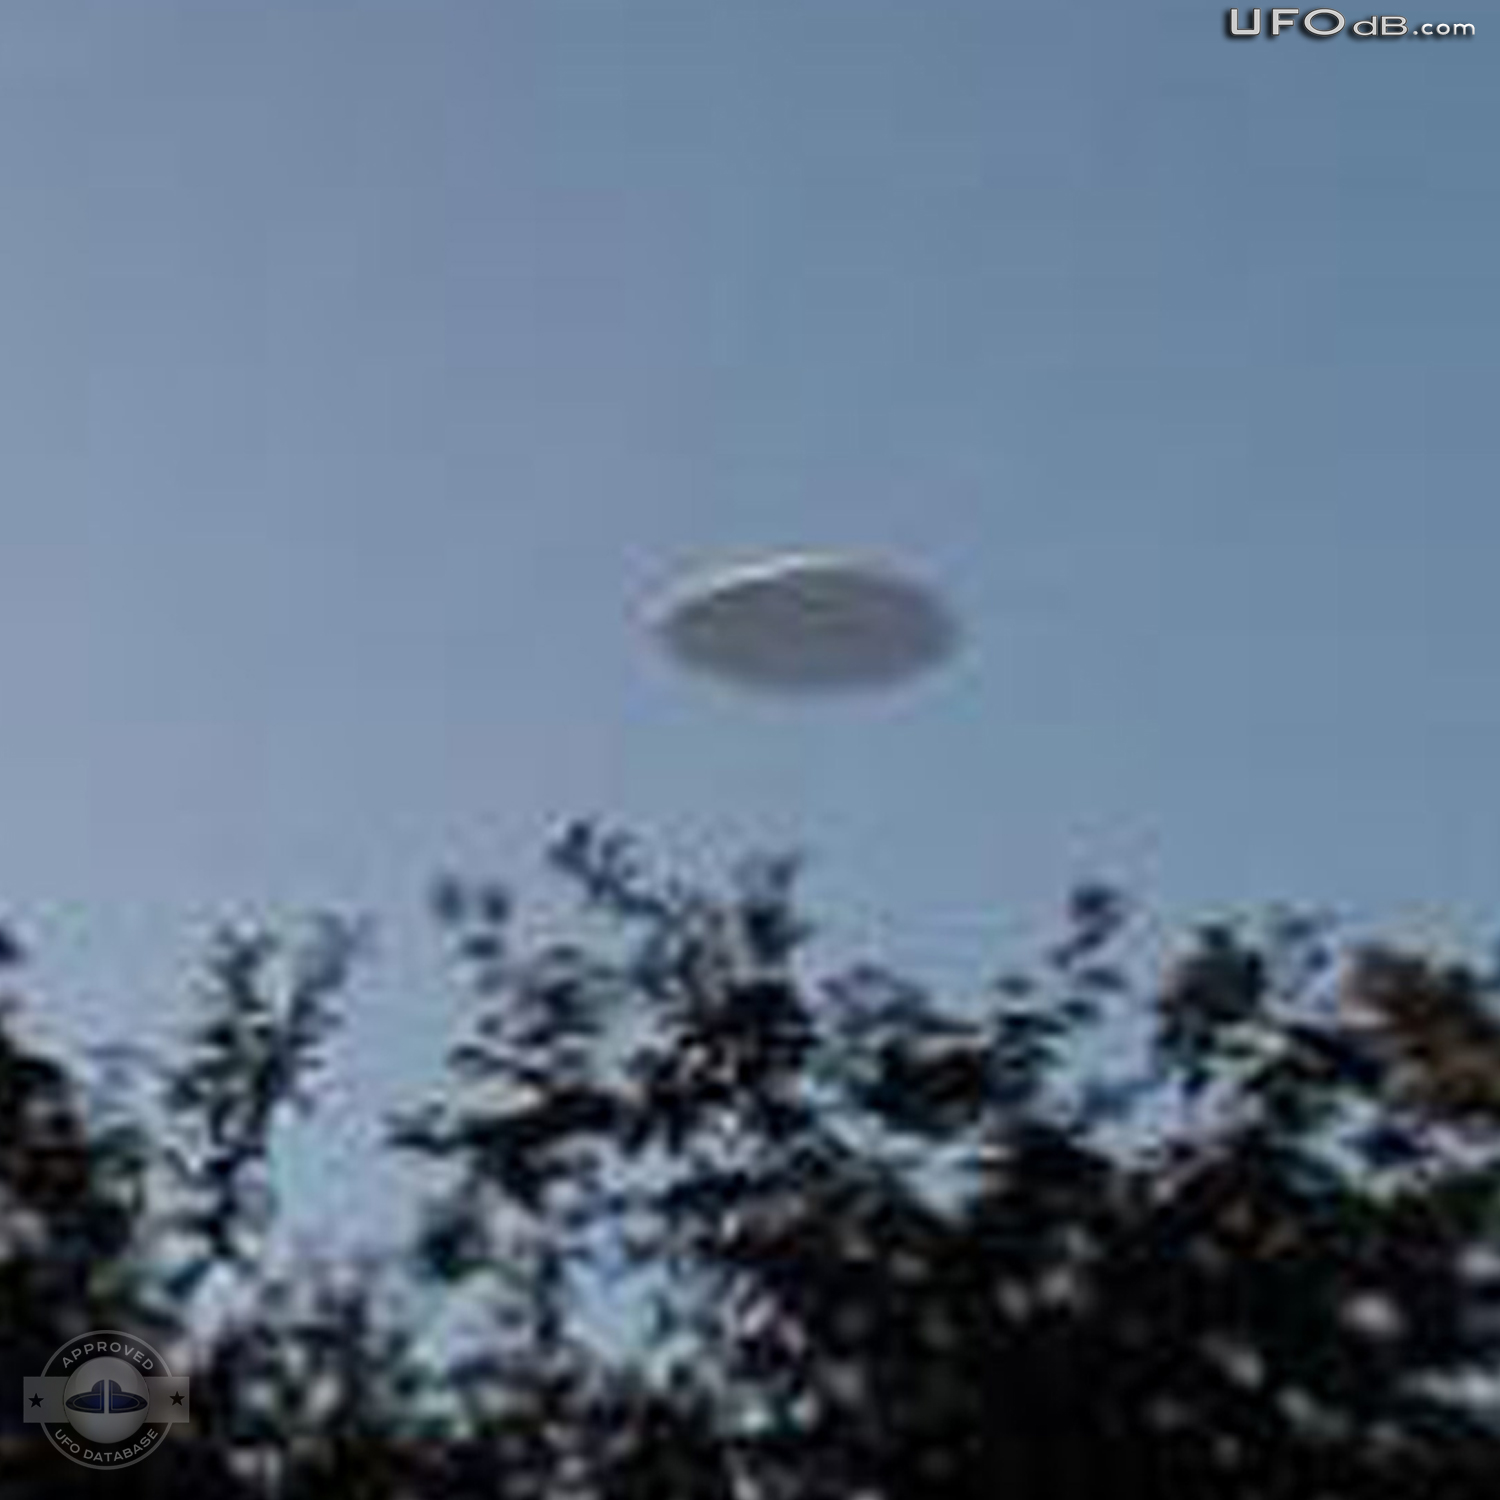 In Vestal New York a witness sees a UFO as large as a Football Stadium UFO Picture #363-2